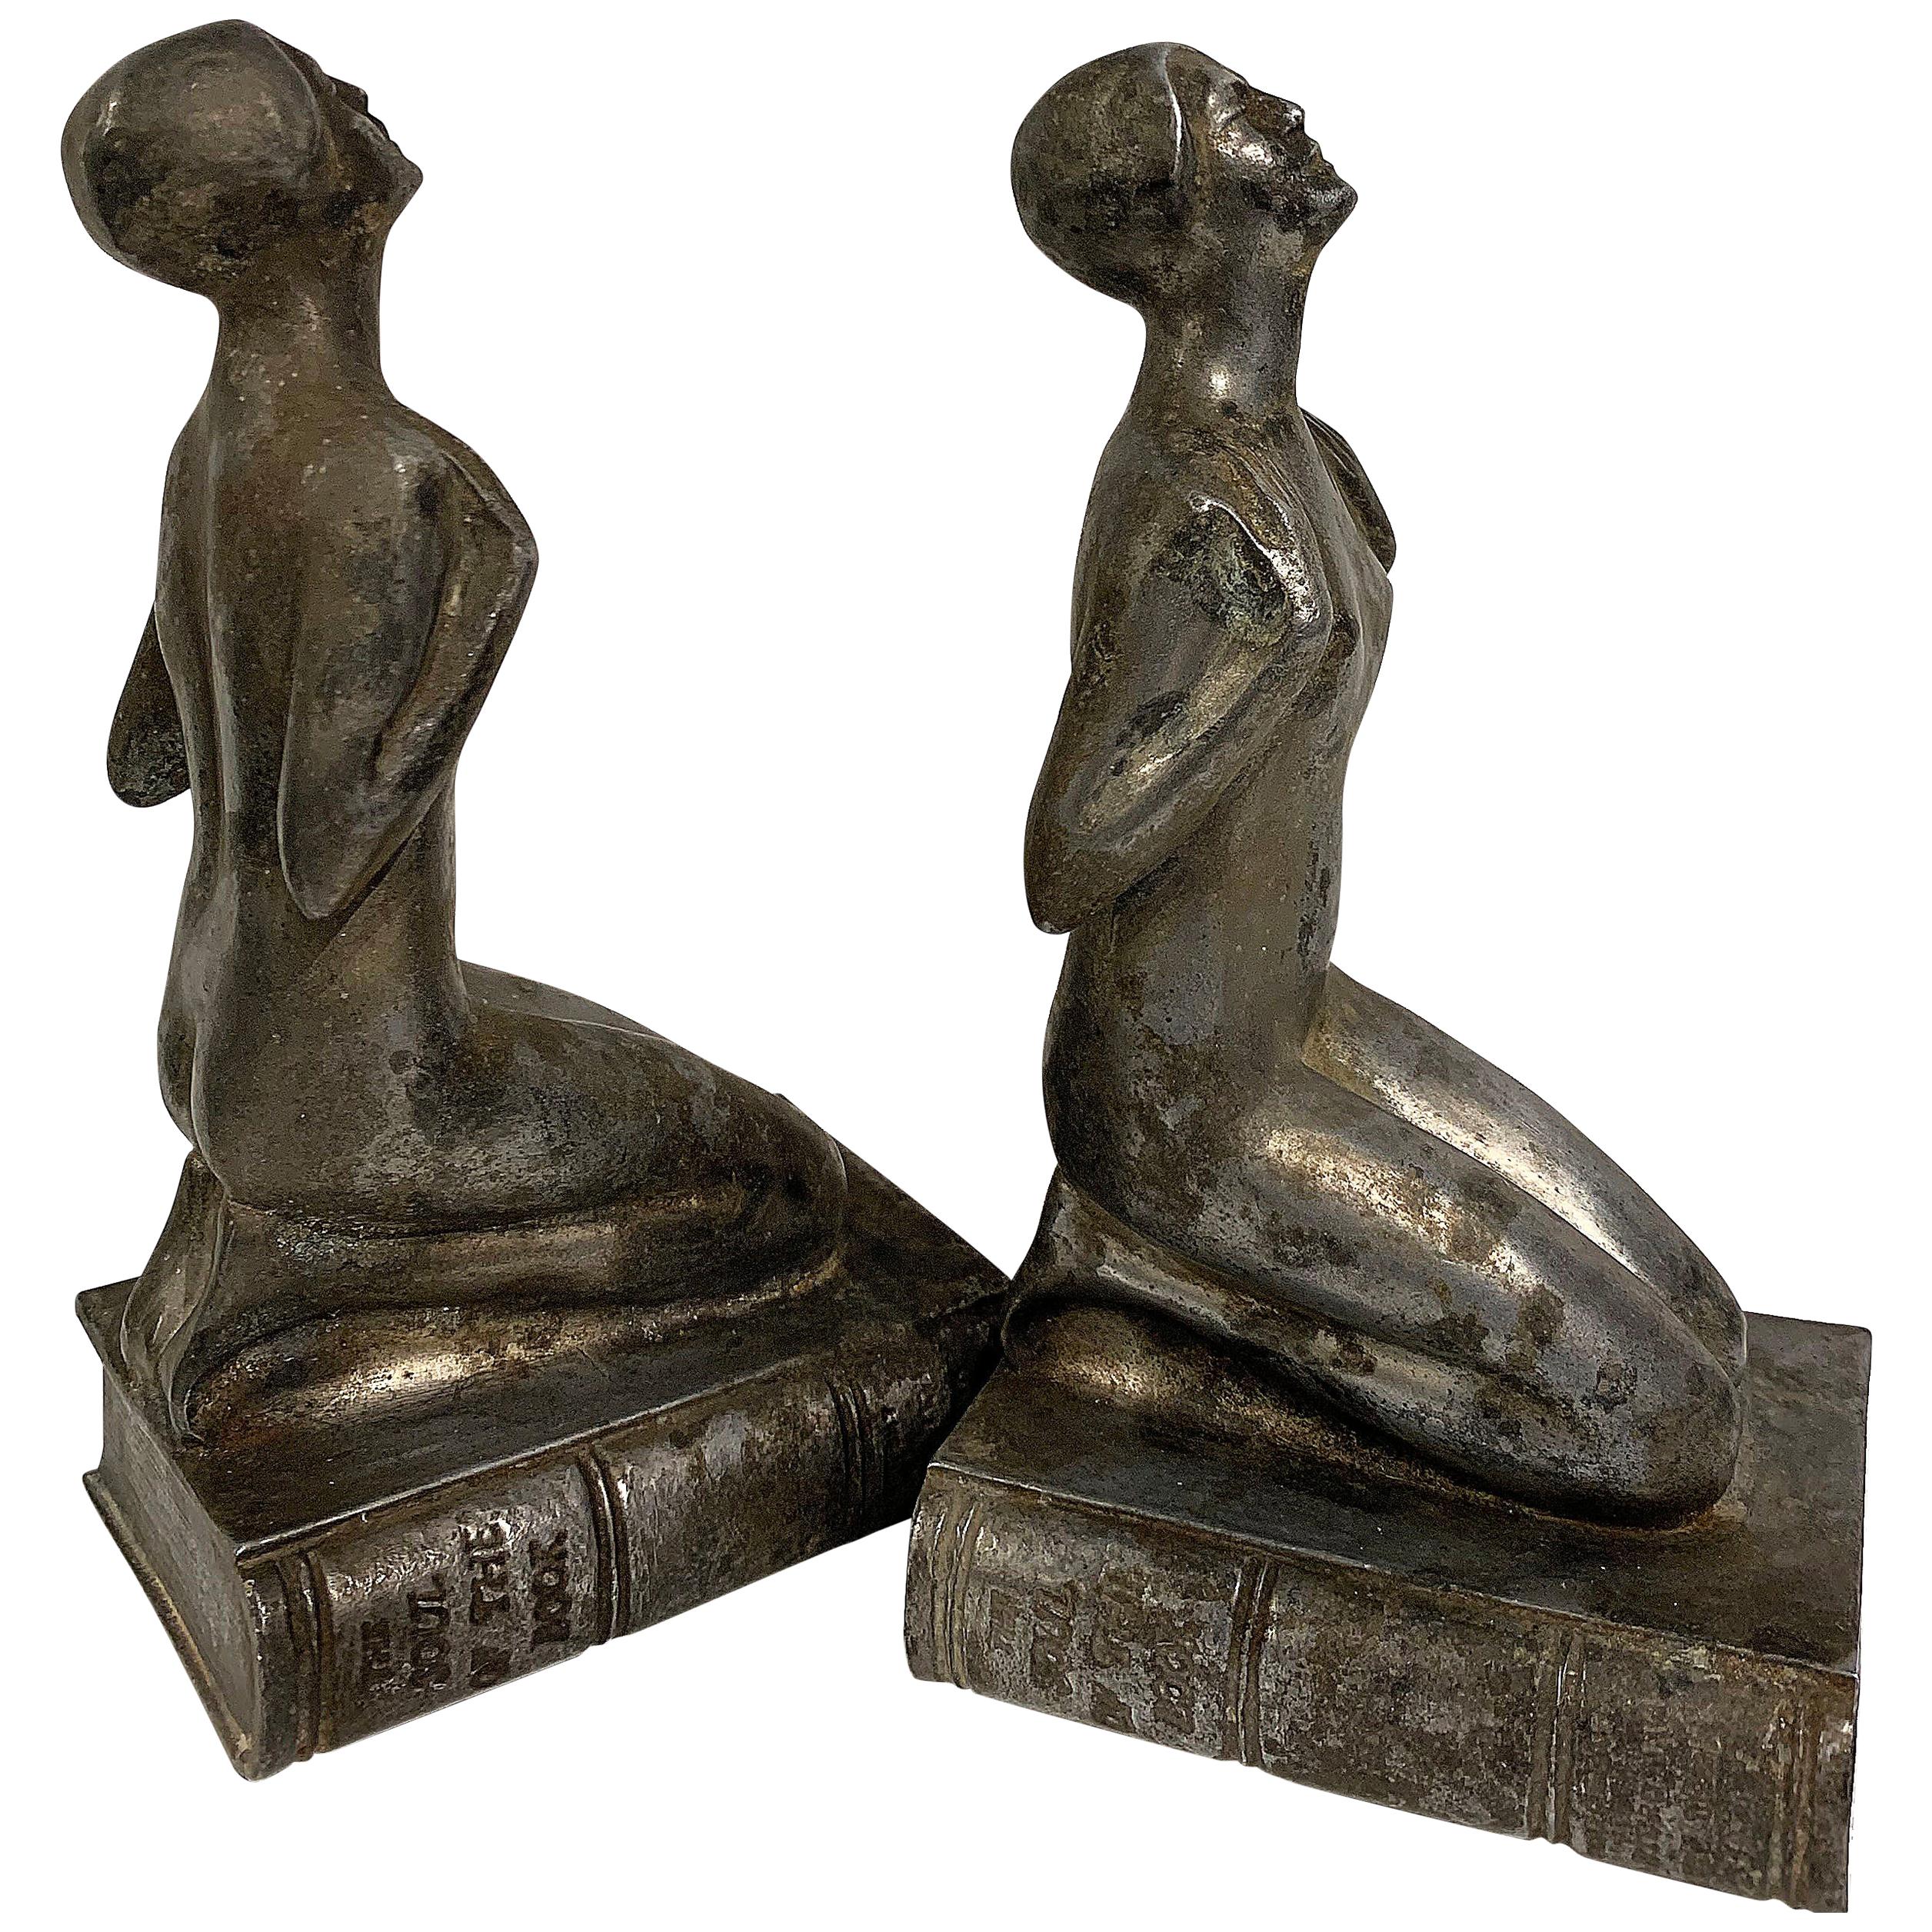 1925 Chrome Female Bookends, "The Soul of The Book" by Arturo Levi